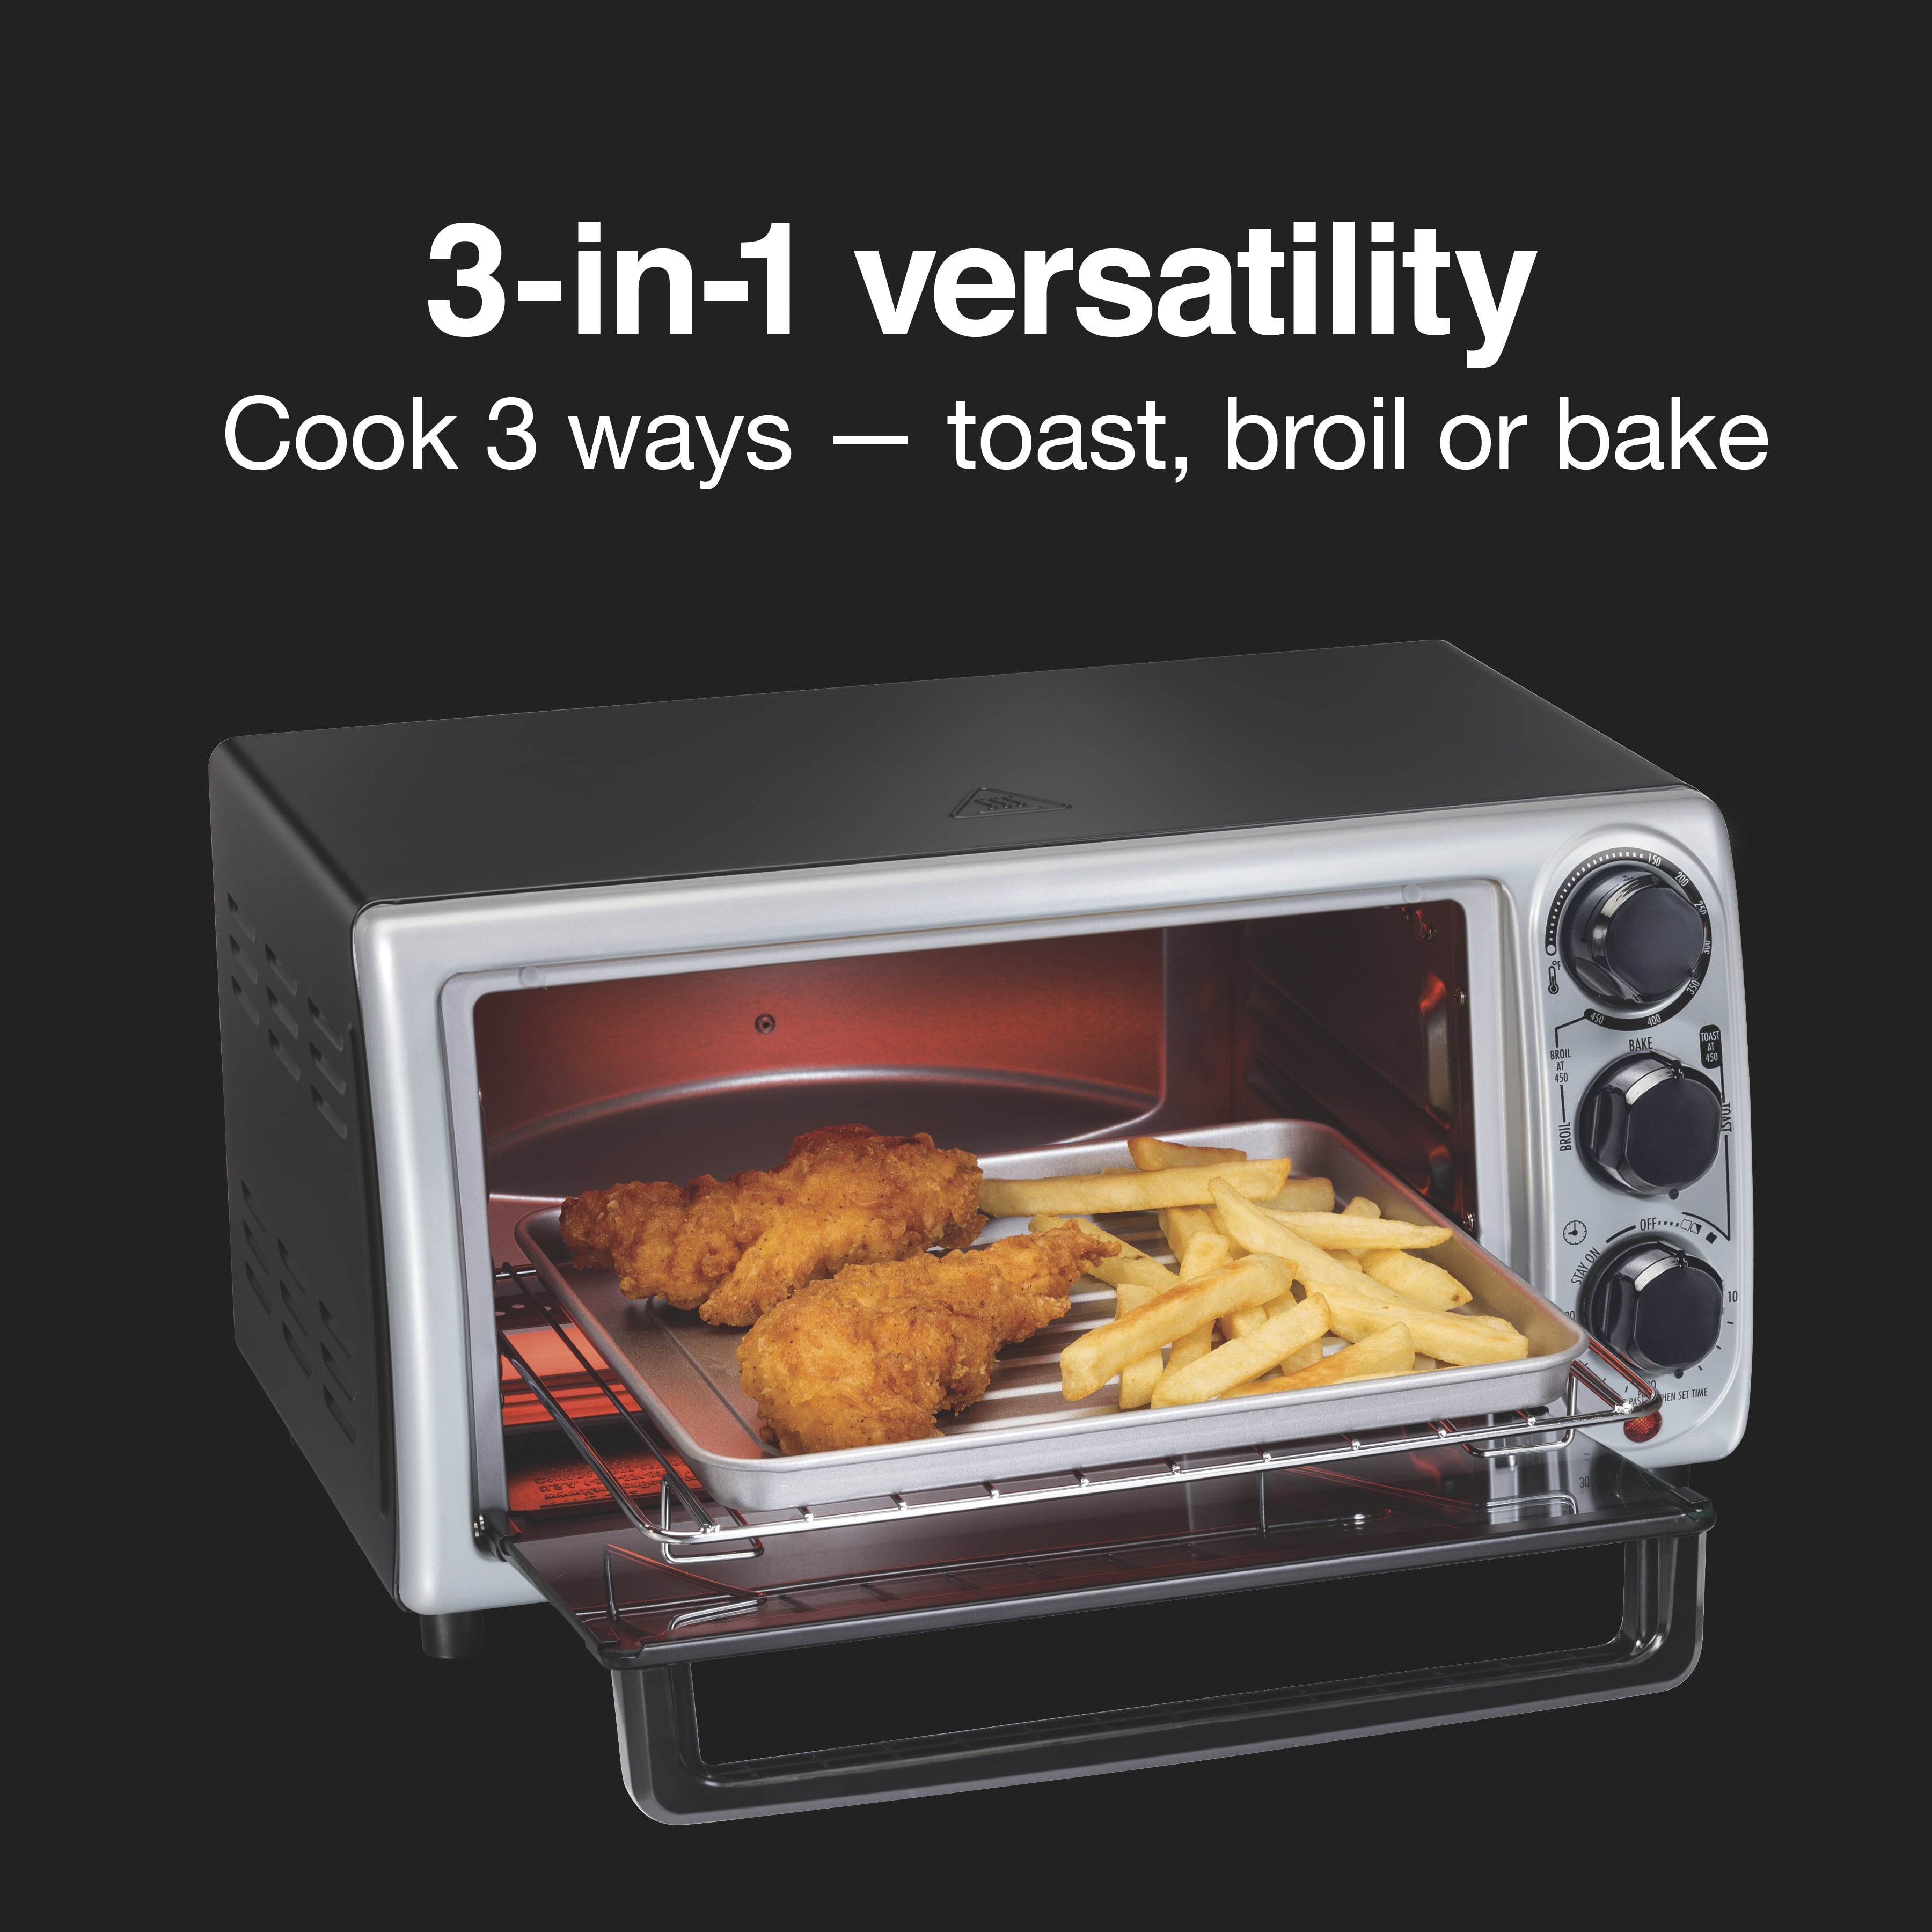 Proctor Silex Simply-Crisp Toaster Oven Air Fryer Combo with 4 Functions  Including Convection, Bake & Broil, Fits 4 Slices or 12” Pizza, Auto  Shutoff